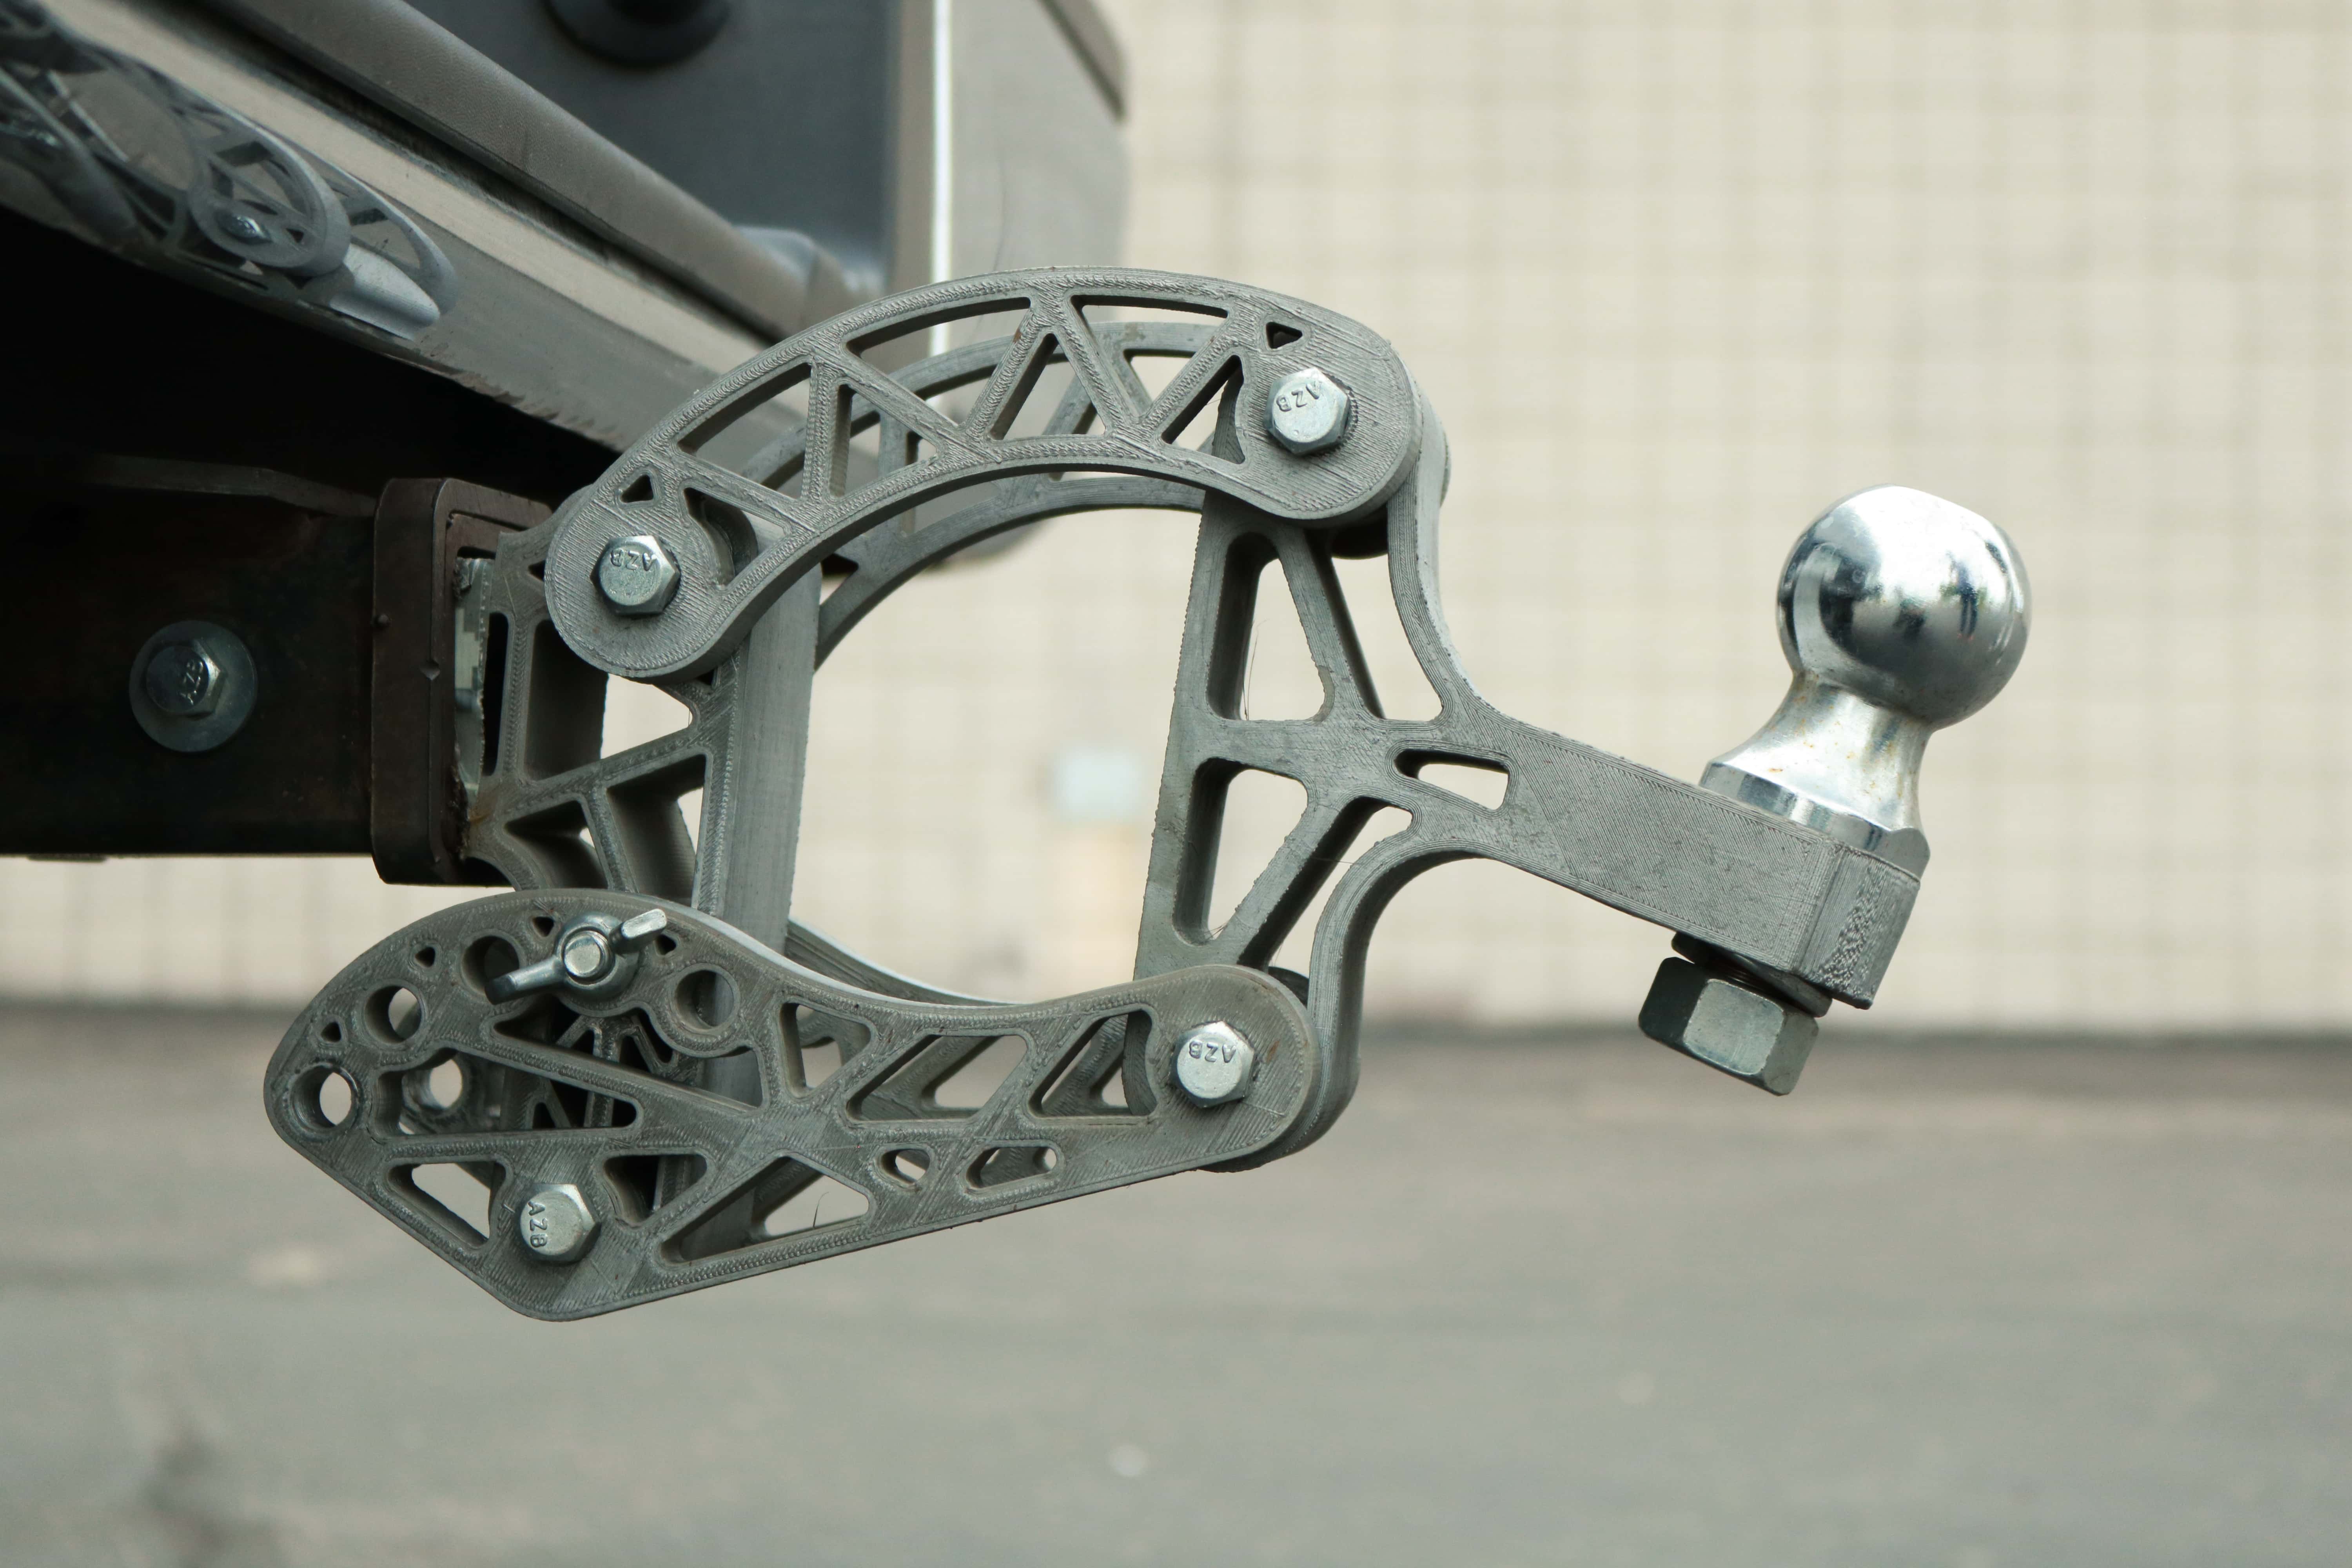 3d Printed Parts Create A Tricked Out Truck Padt Inc The Blog